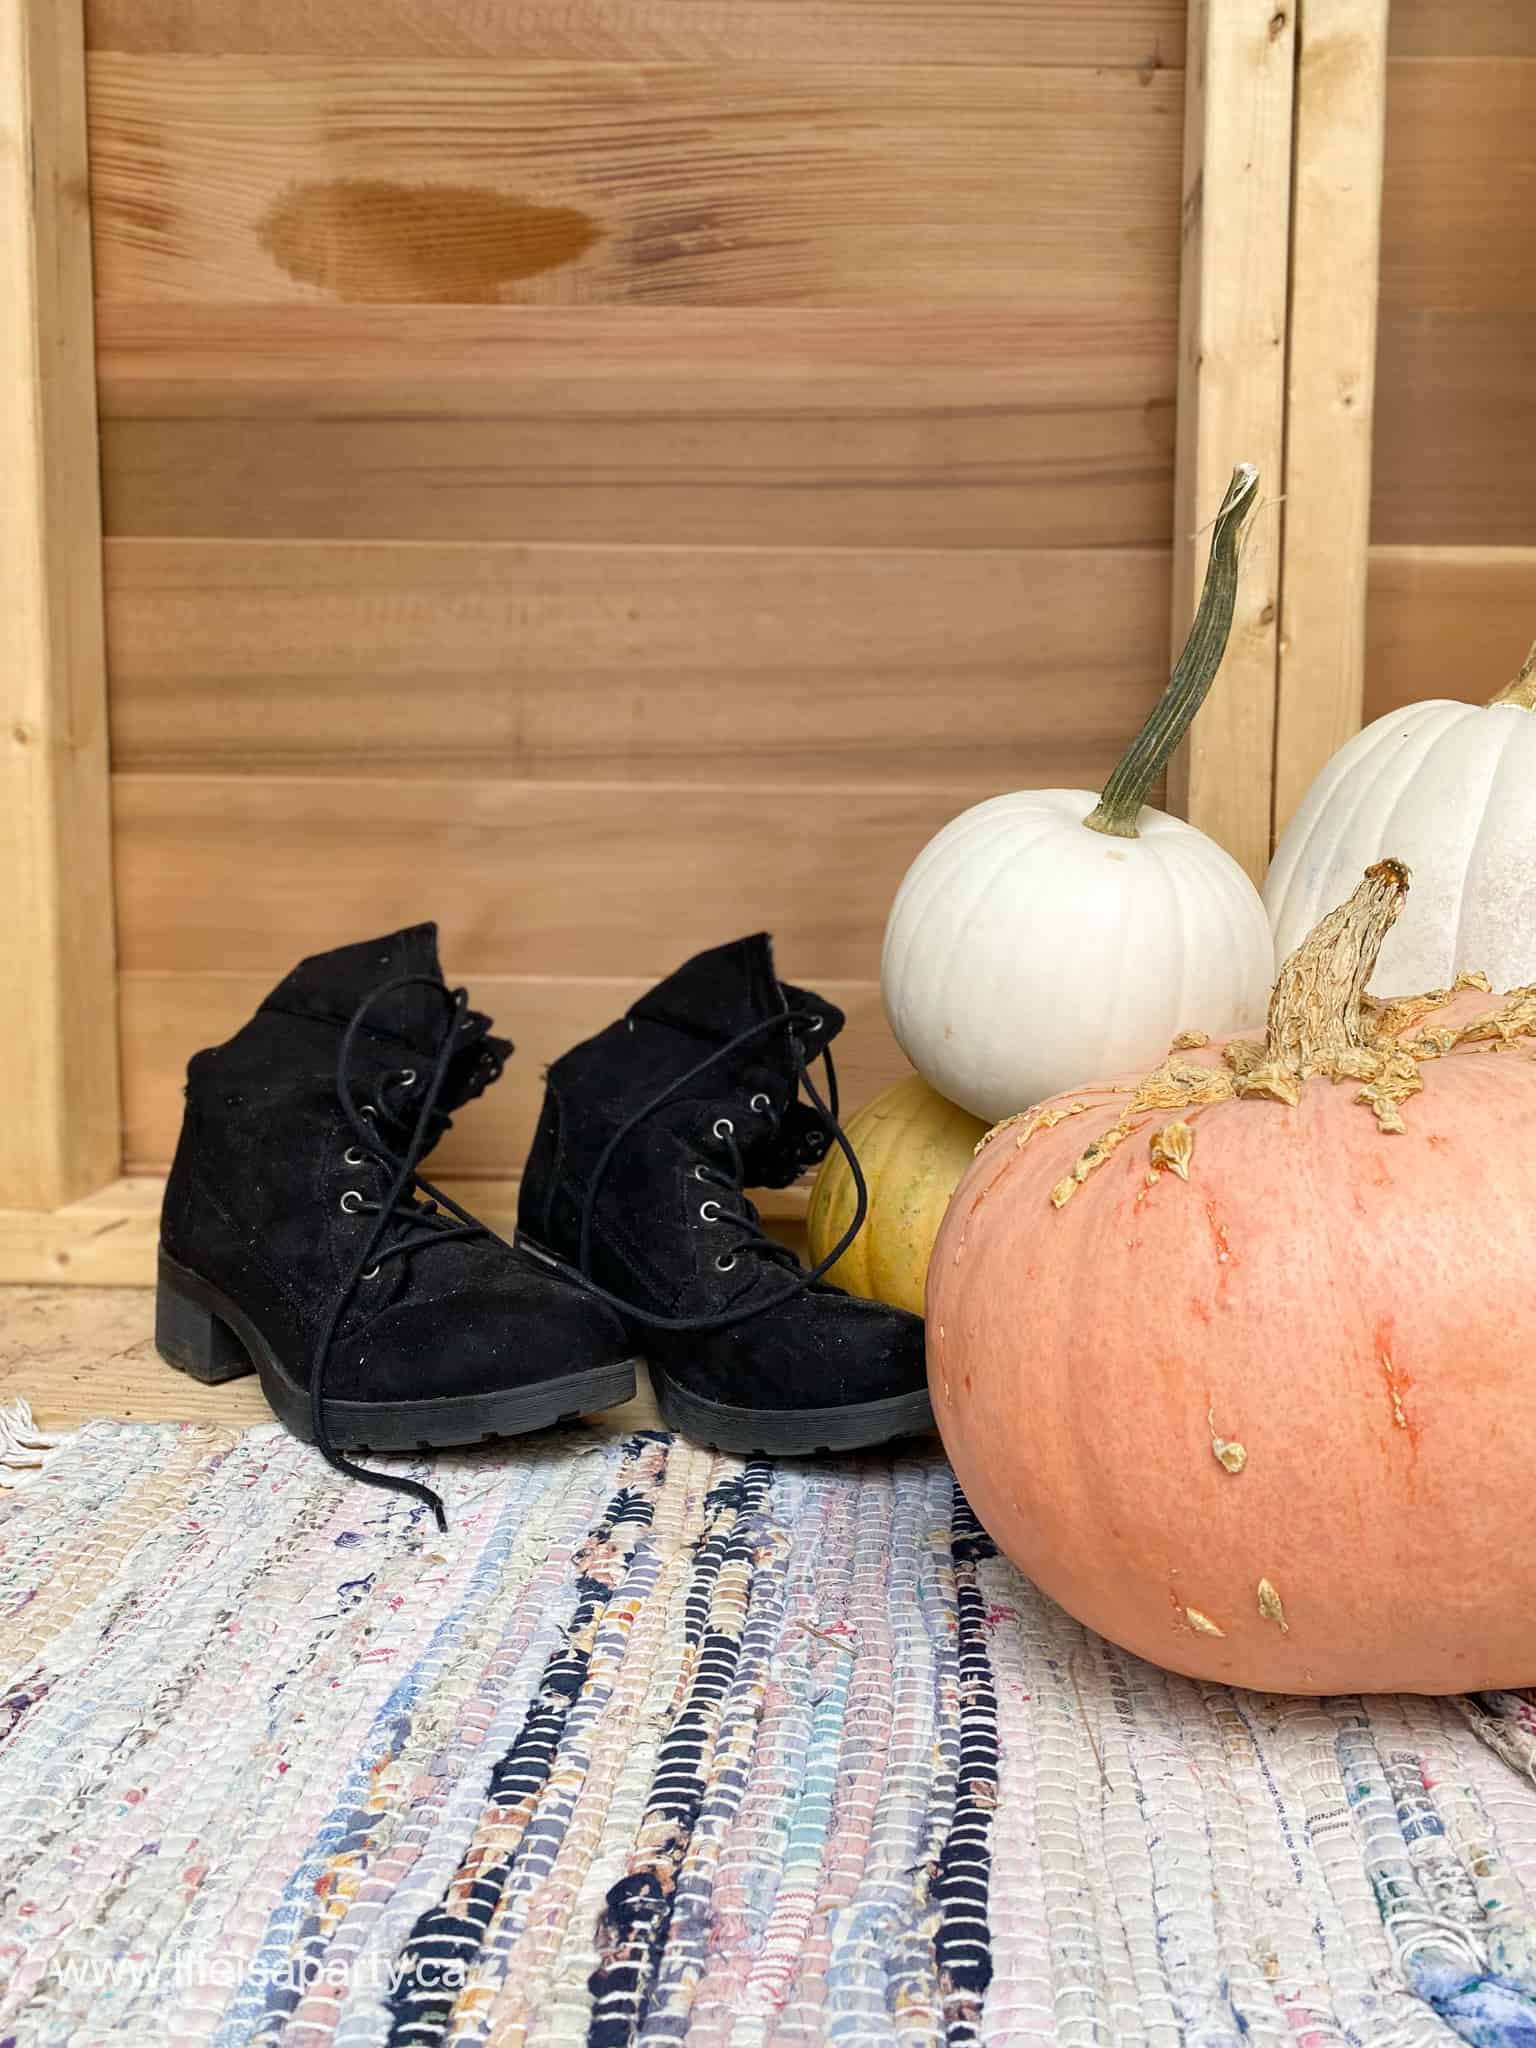 witch shoes and pumpkins